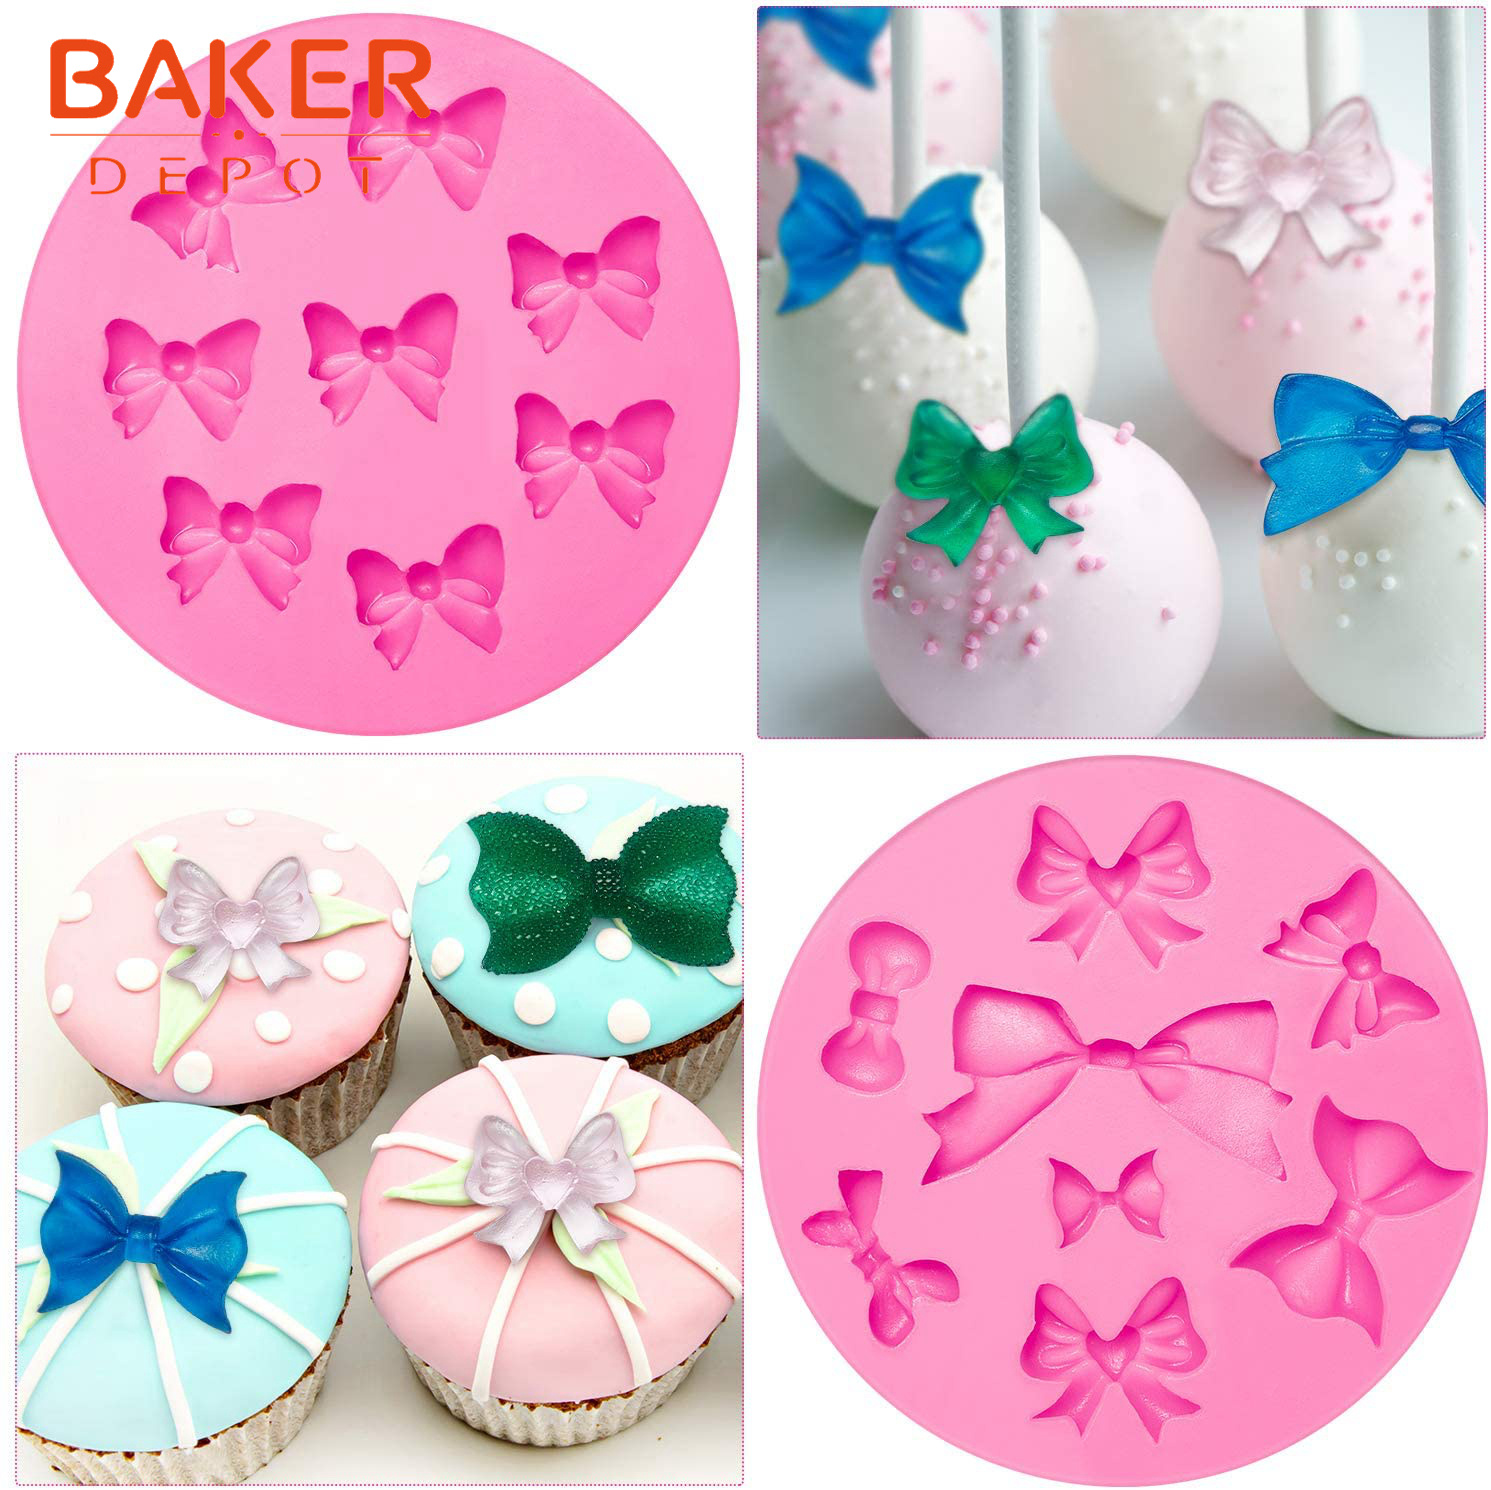 http://images.51microshop.com/1044/product/20200620/Mini_Bow_Silicone_Fondant_Molds_Bowknot_Fondant_Chocolate_Candy_Molds_Bow_Sugar_Craft_DIY_Cake_Molds_for_Birthday_Party_Cake_Cupcake_Decoration_Set_of_3_1592627787526_0.jpg